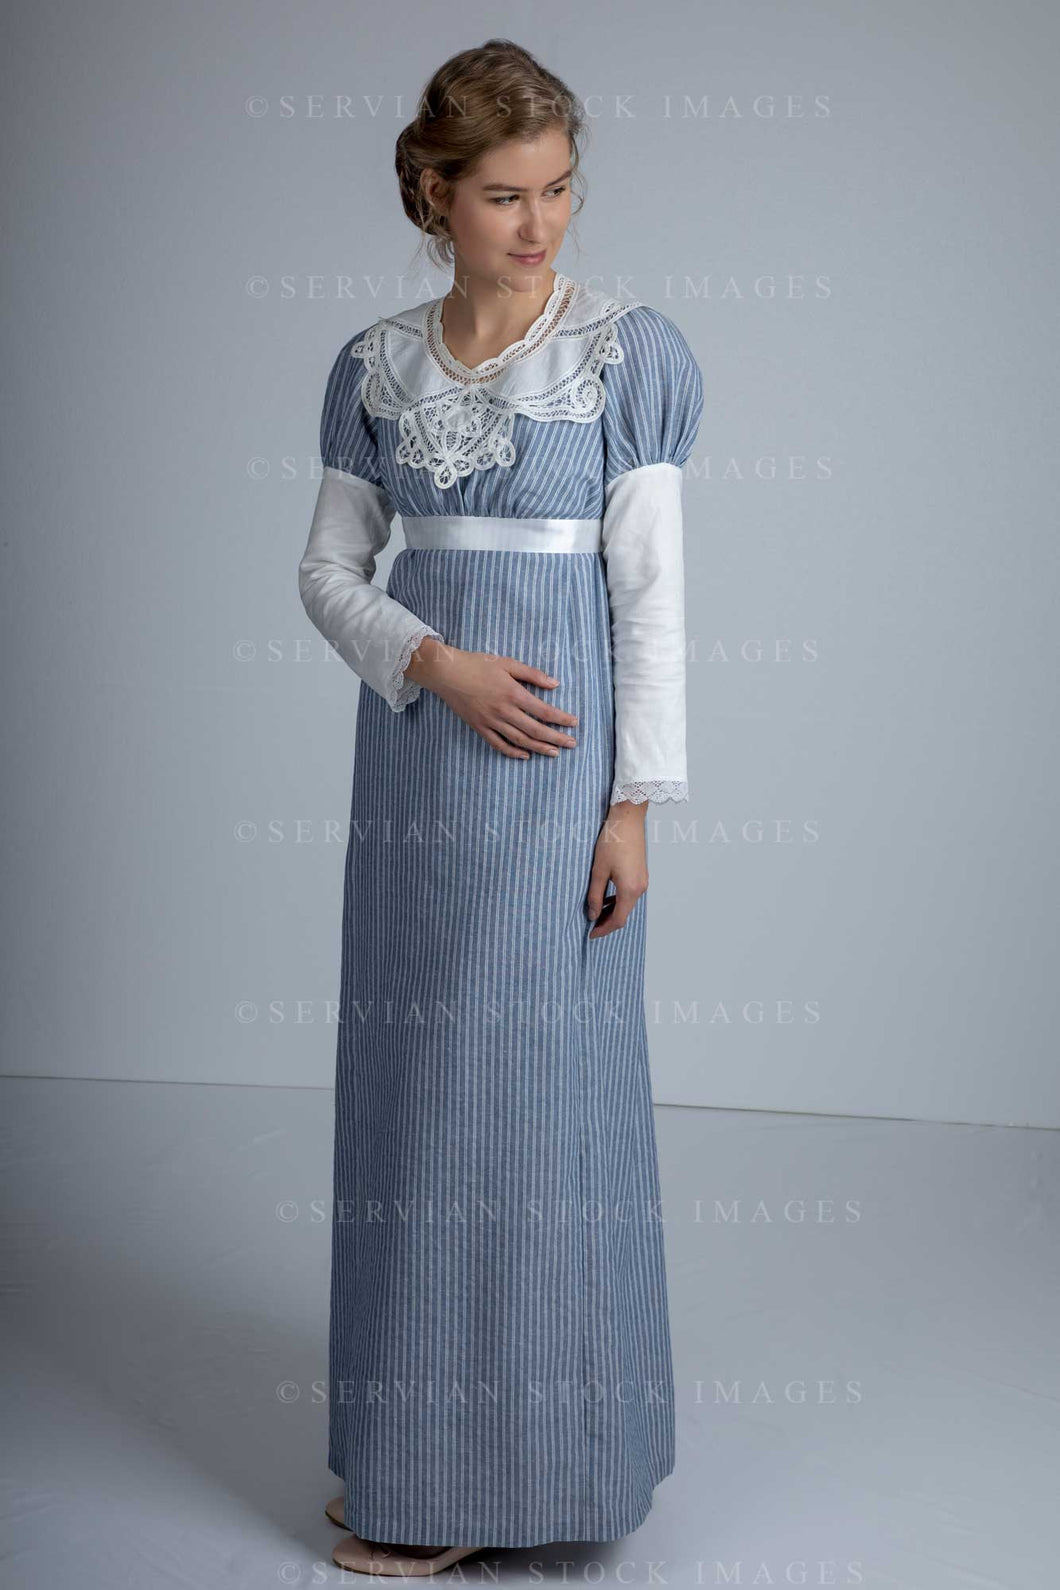 Regency woman in a striped cotton dress with a lace collar (Amalia 0619)